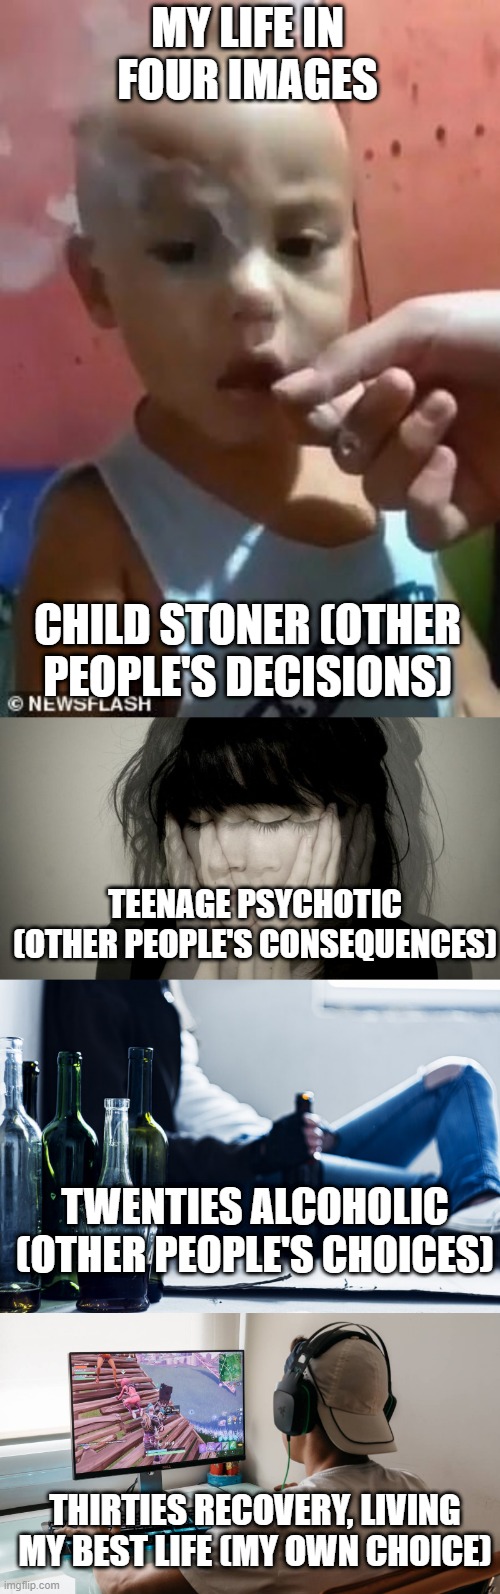 MY LIFE IN FOUR IMAGES; CHILD STONER (OTHER PEOPLE'S DECISIONS); TEENAGE PSYCHOTIC (OTHER PEOPLE'S CONSEQUENCES); TWENTIES ALCOHOLIC (OTHER PEOPLE'S CHOICES); THIRTIES RECOVERY, LIVING MY BEST LIFE (MY OWN CHOICE) | image tagged in life | made w/ Imgflip meme maker